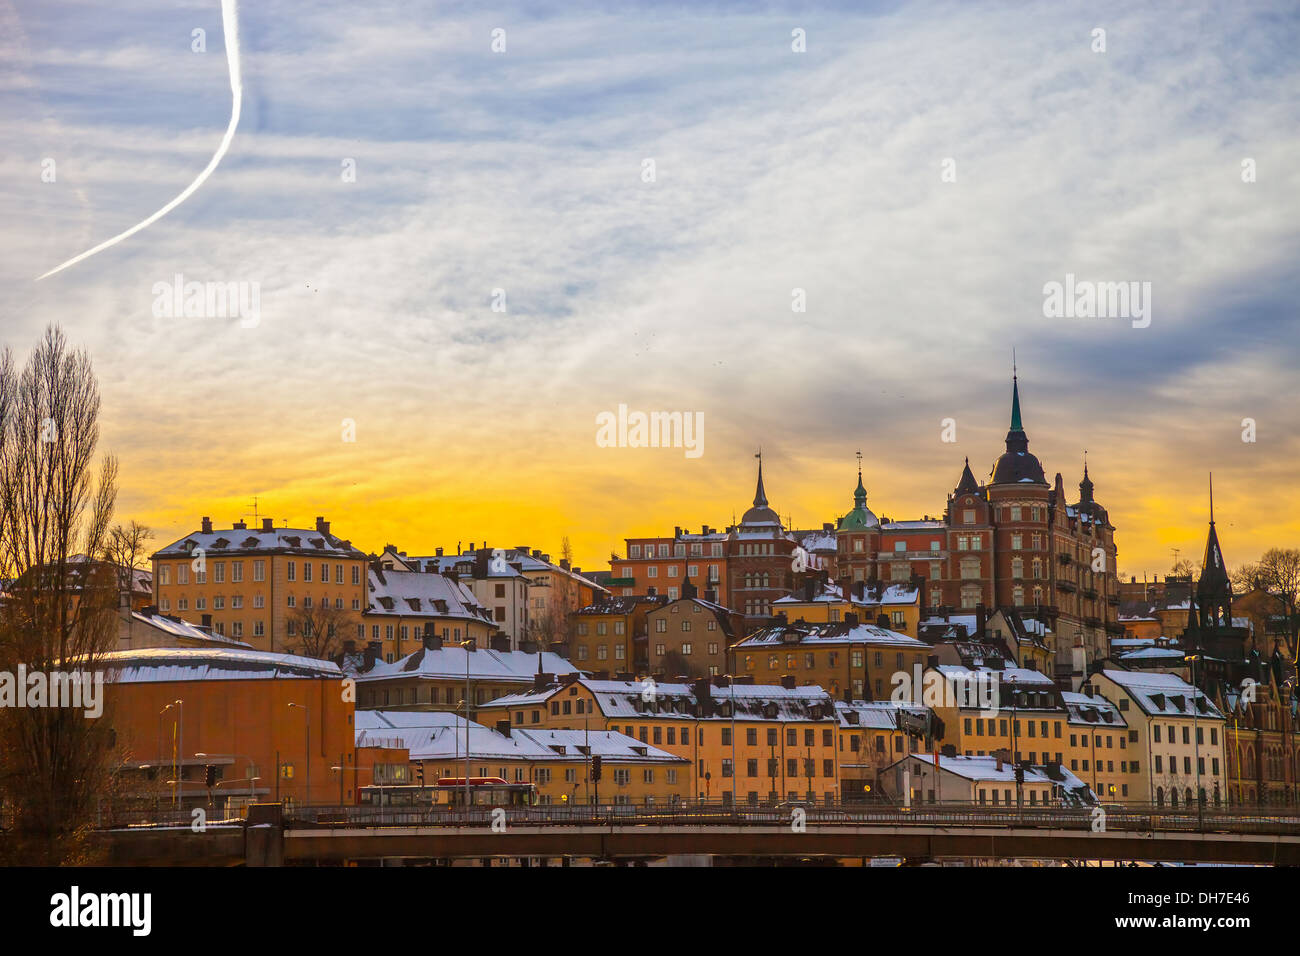 Beautiful architecture in Stockholm Sodermalm area in winter at sunset. Stock Photo